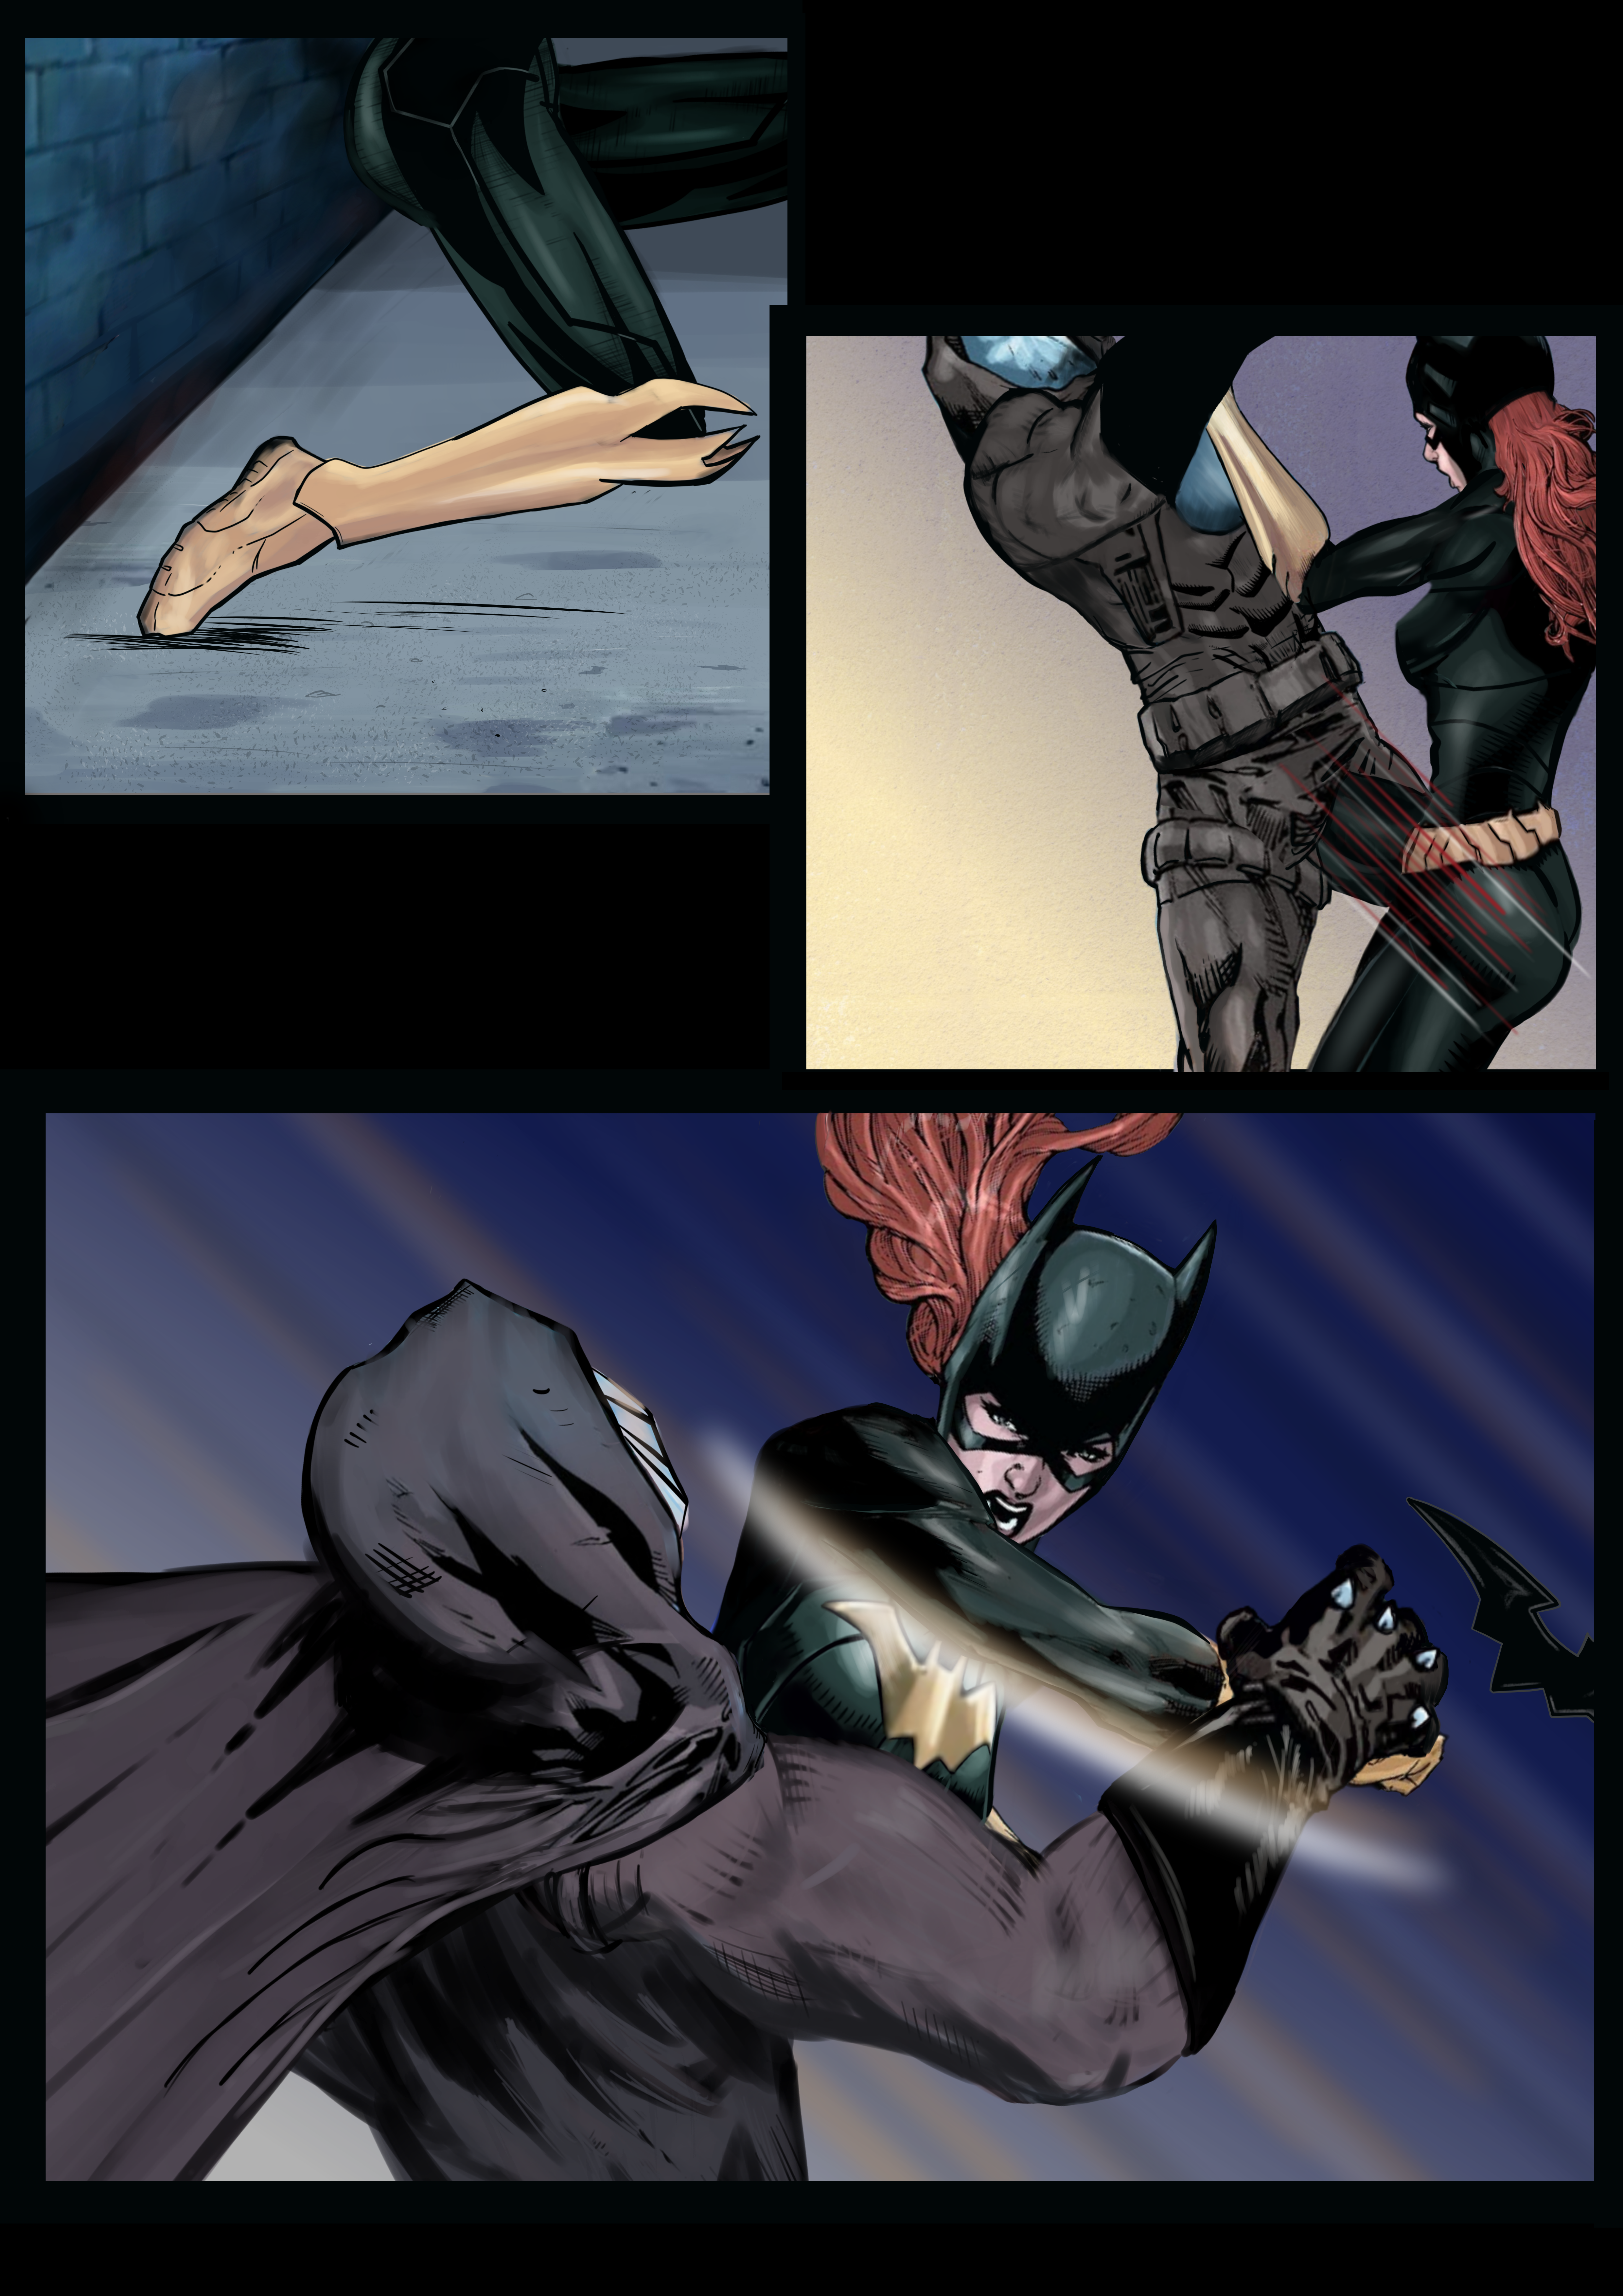 batgirl_vs_mirror_rematch___page_30_by_hborges77-dclvgi5.png